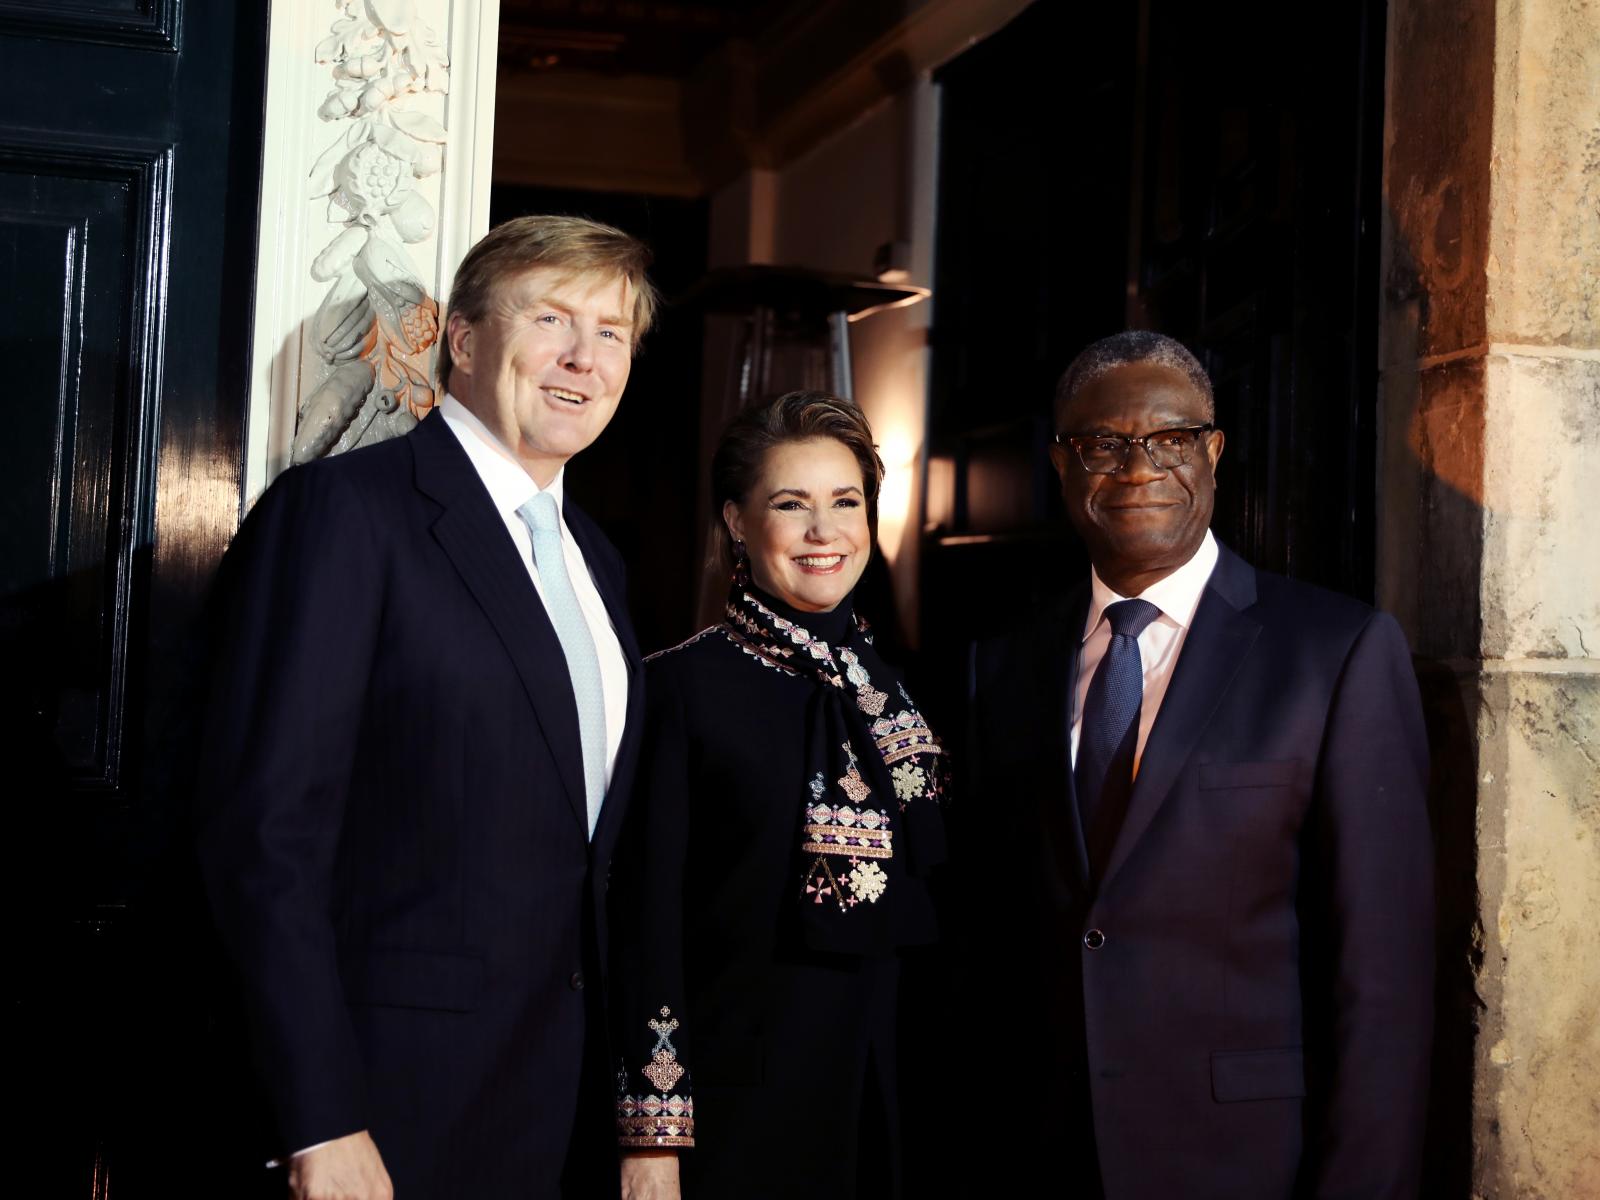 The Grand Duchess with King Willem Alexander and Dr Denis Mukwégé